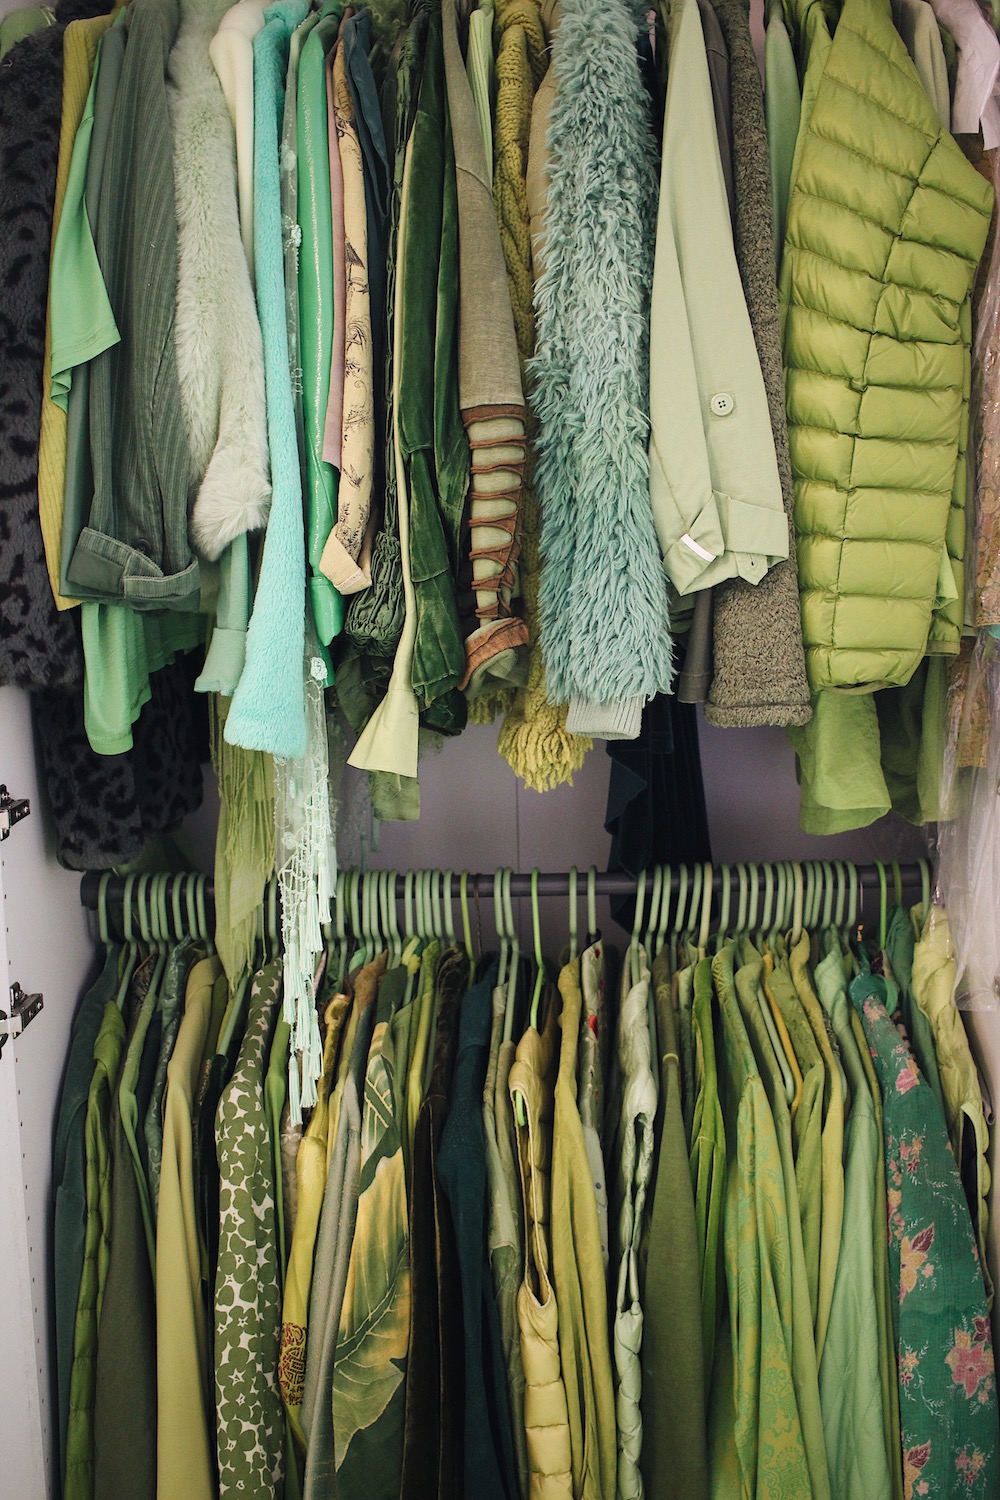 all green clothing in a closet belonging to The Green Lady of Brooklyn